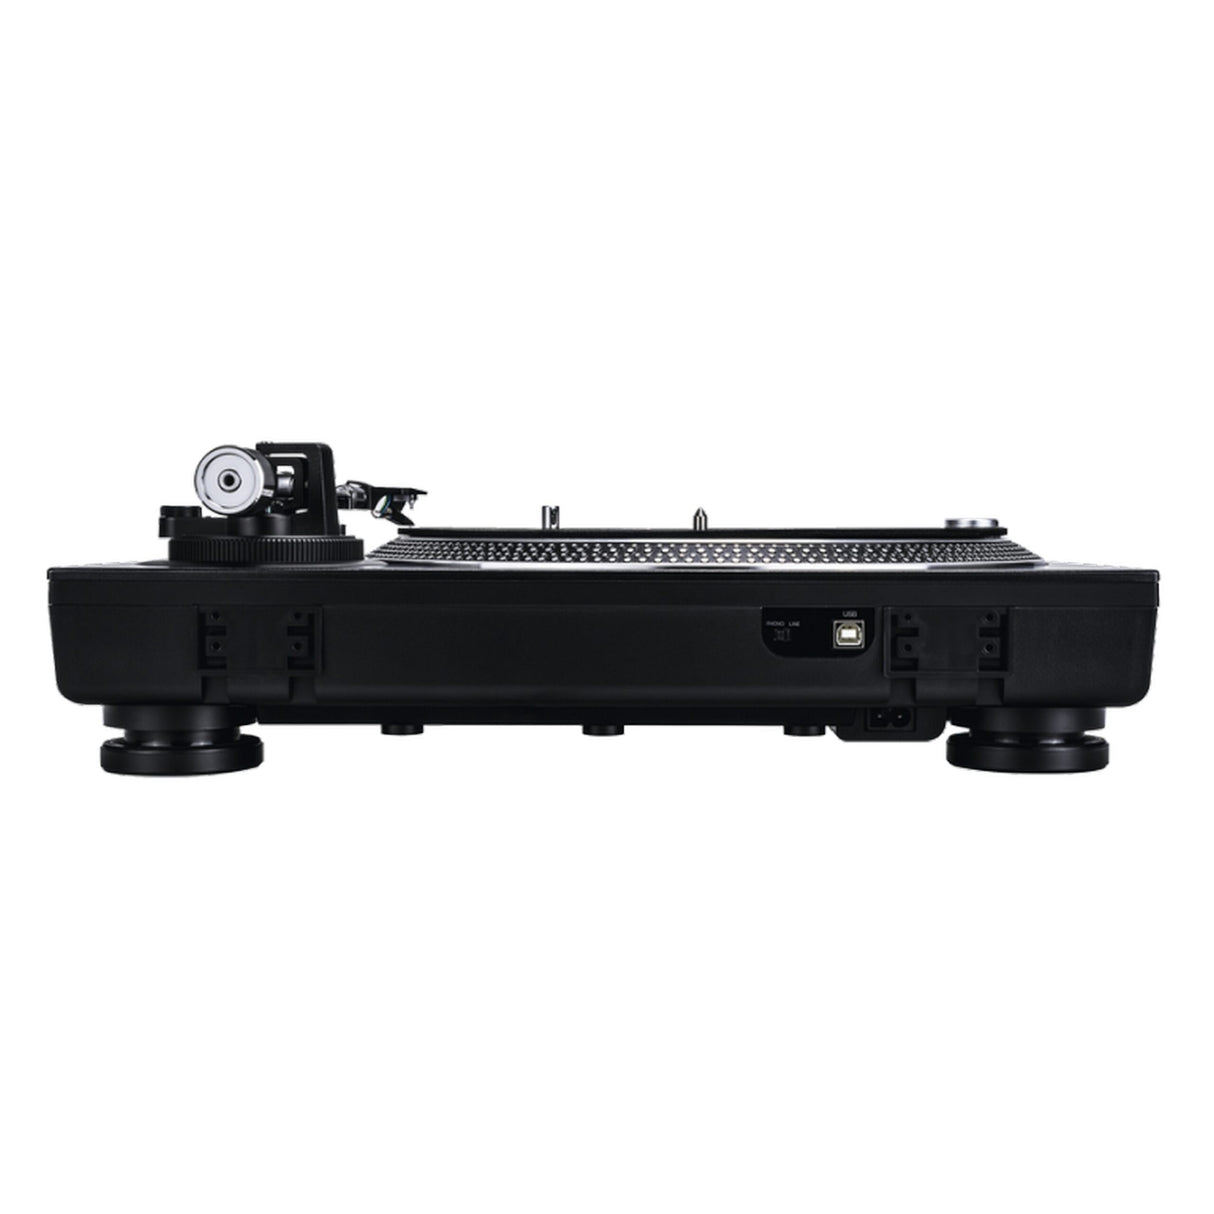 Reloop RP-2000-USB-MK2 Direct Drive USB Turntable System